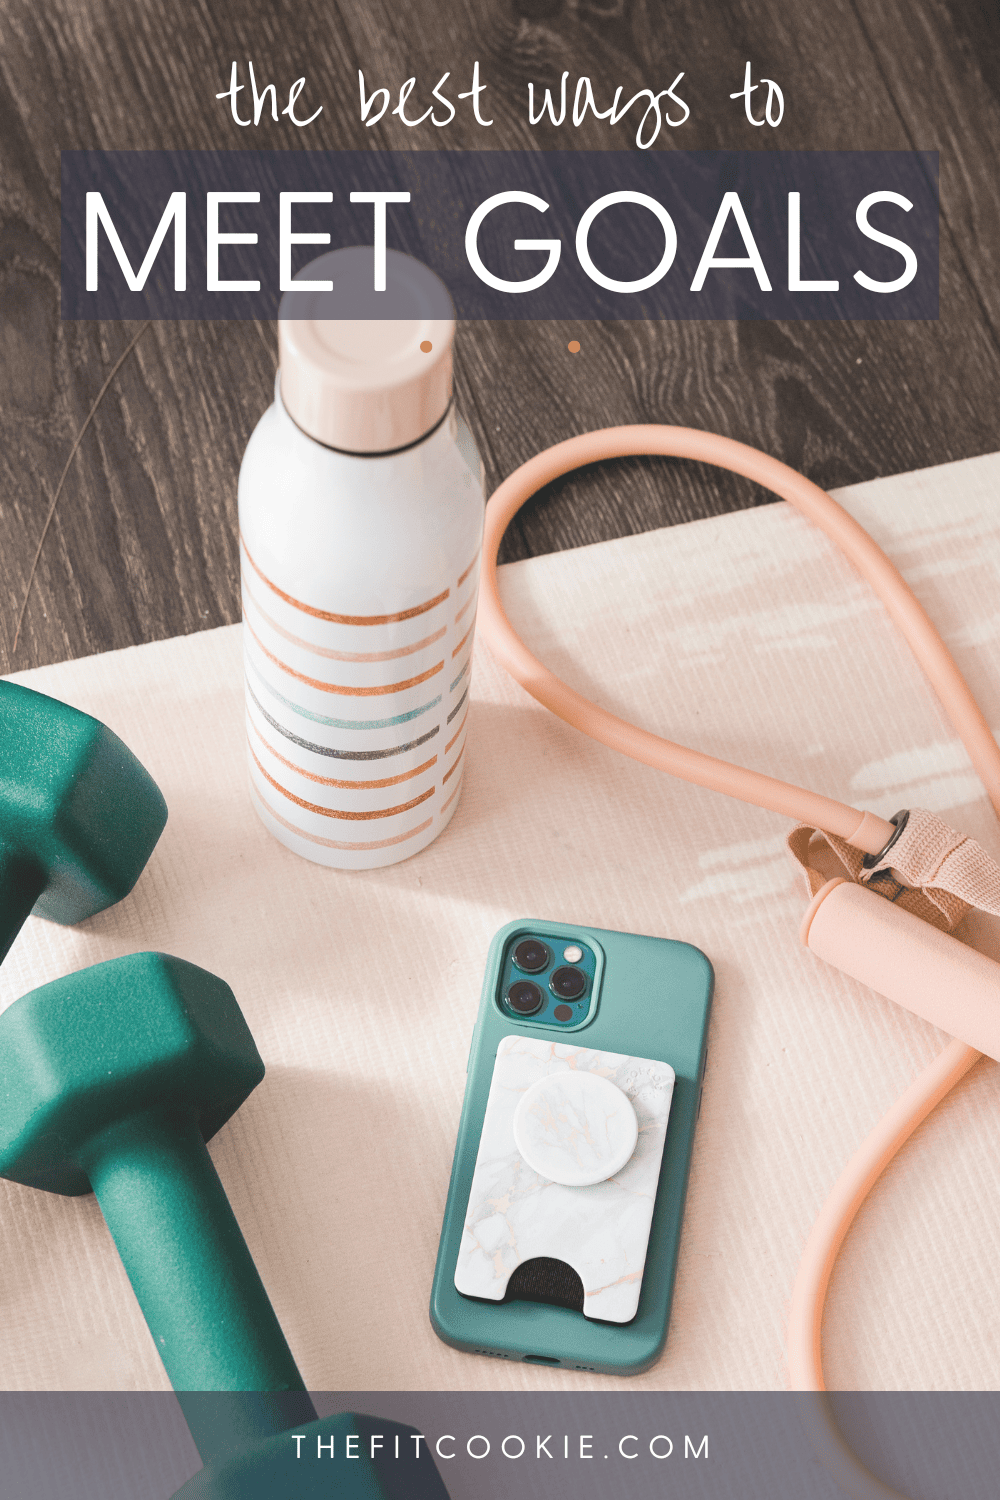 The ultimate guide to setting and meeting goals.